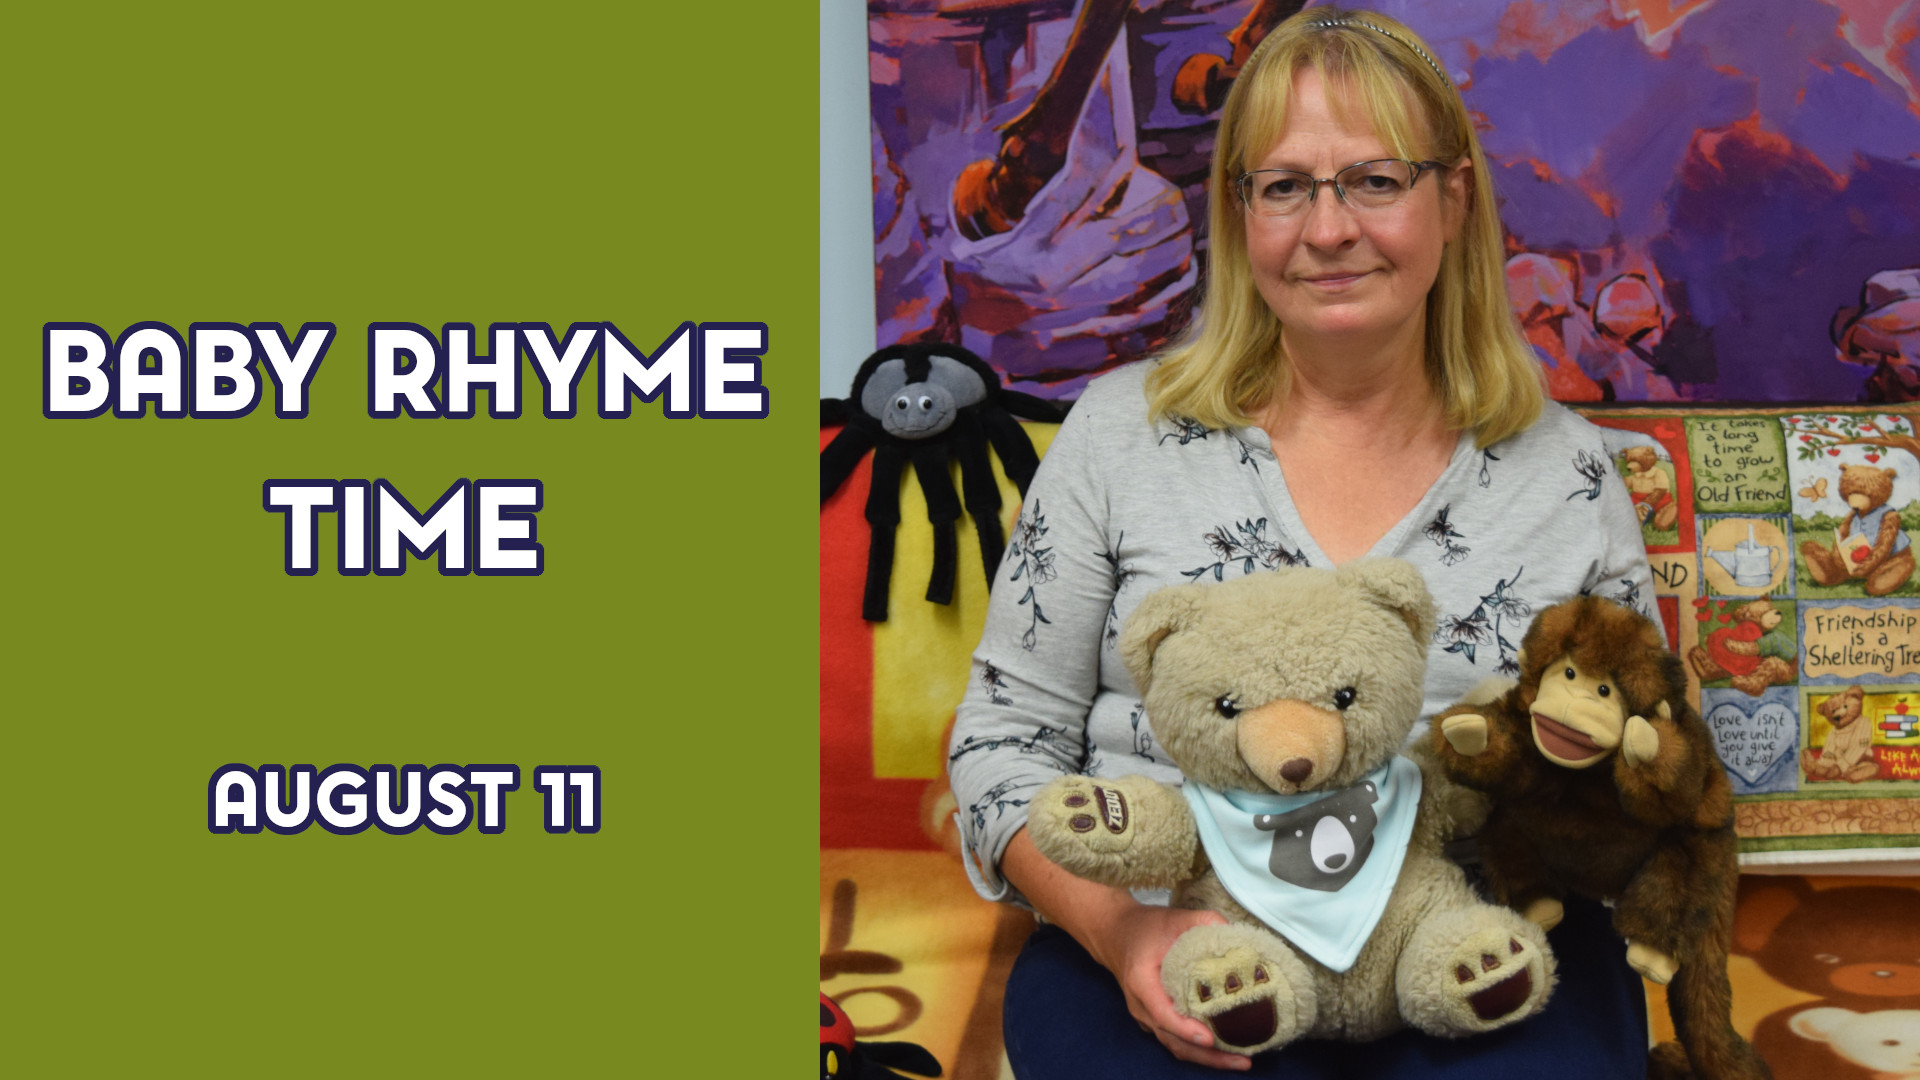 A woman holds stuffed animals next to the text "Baby Rhyme Time August 11"